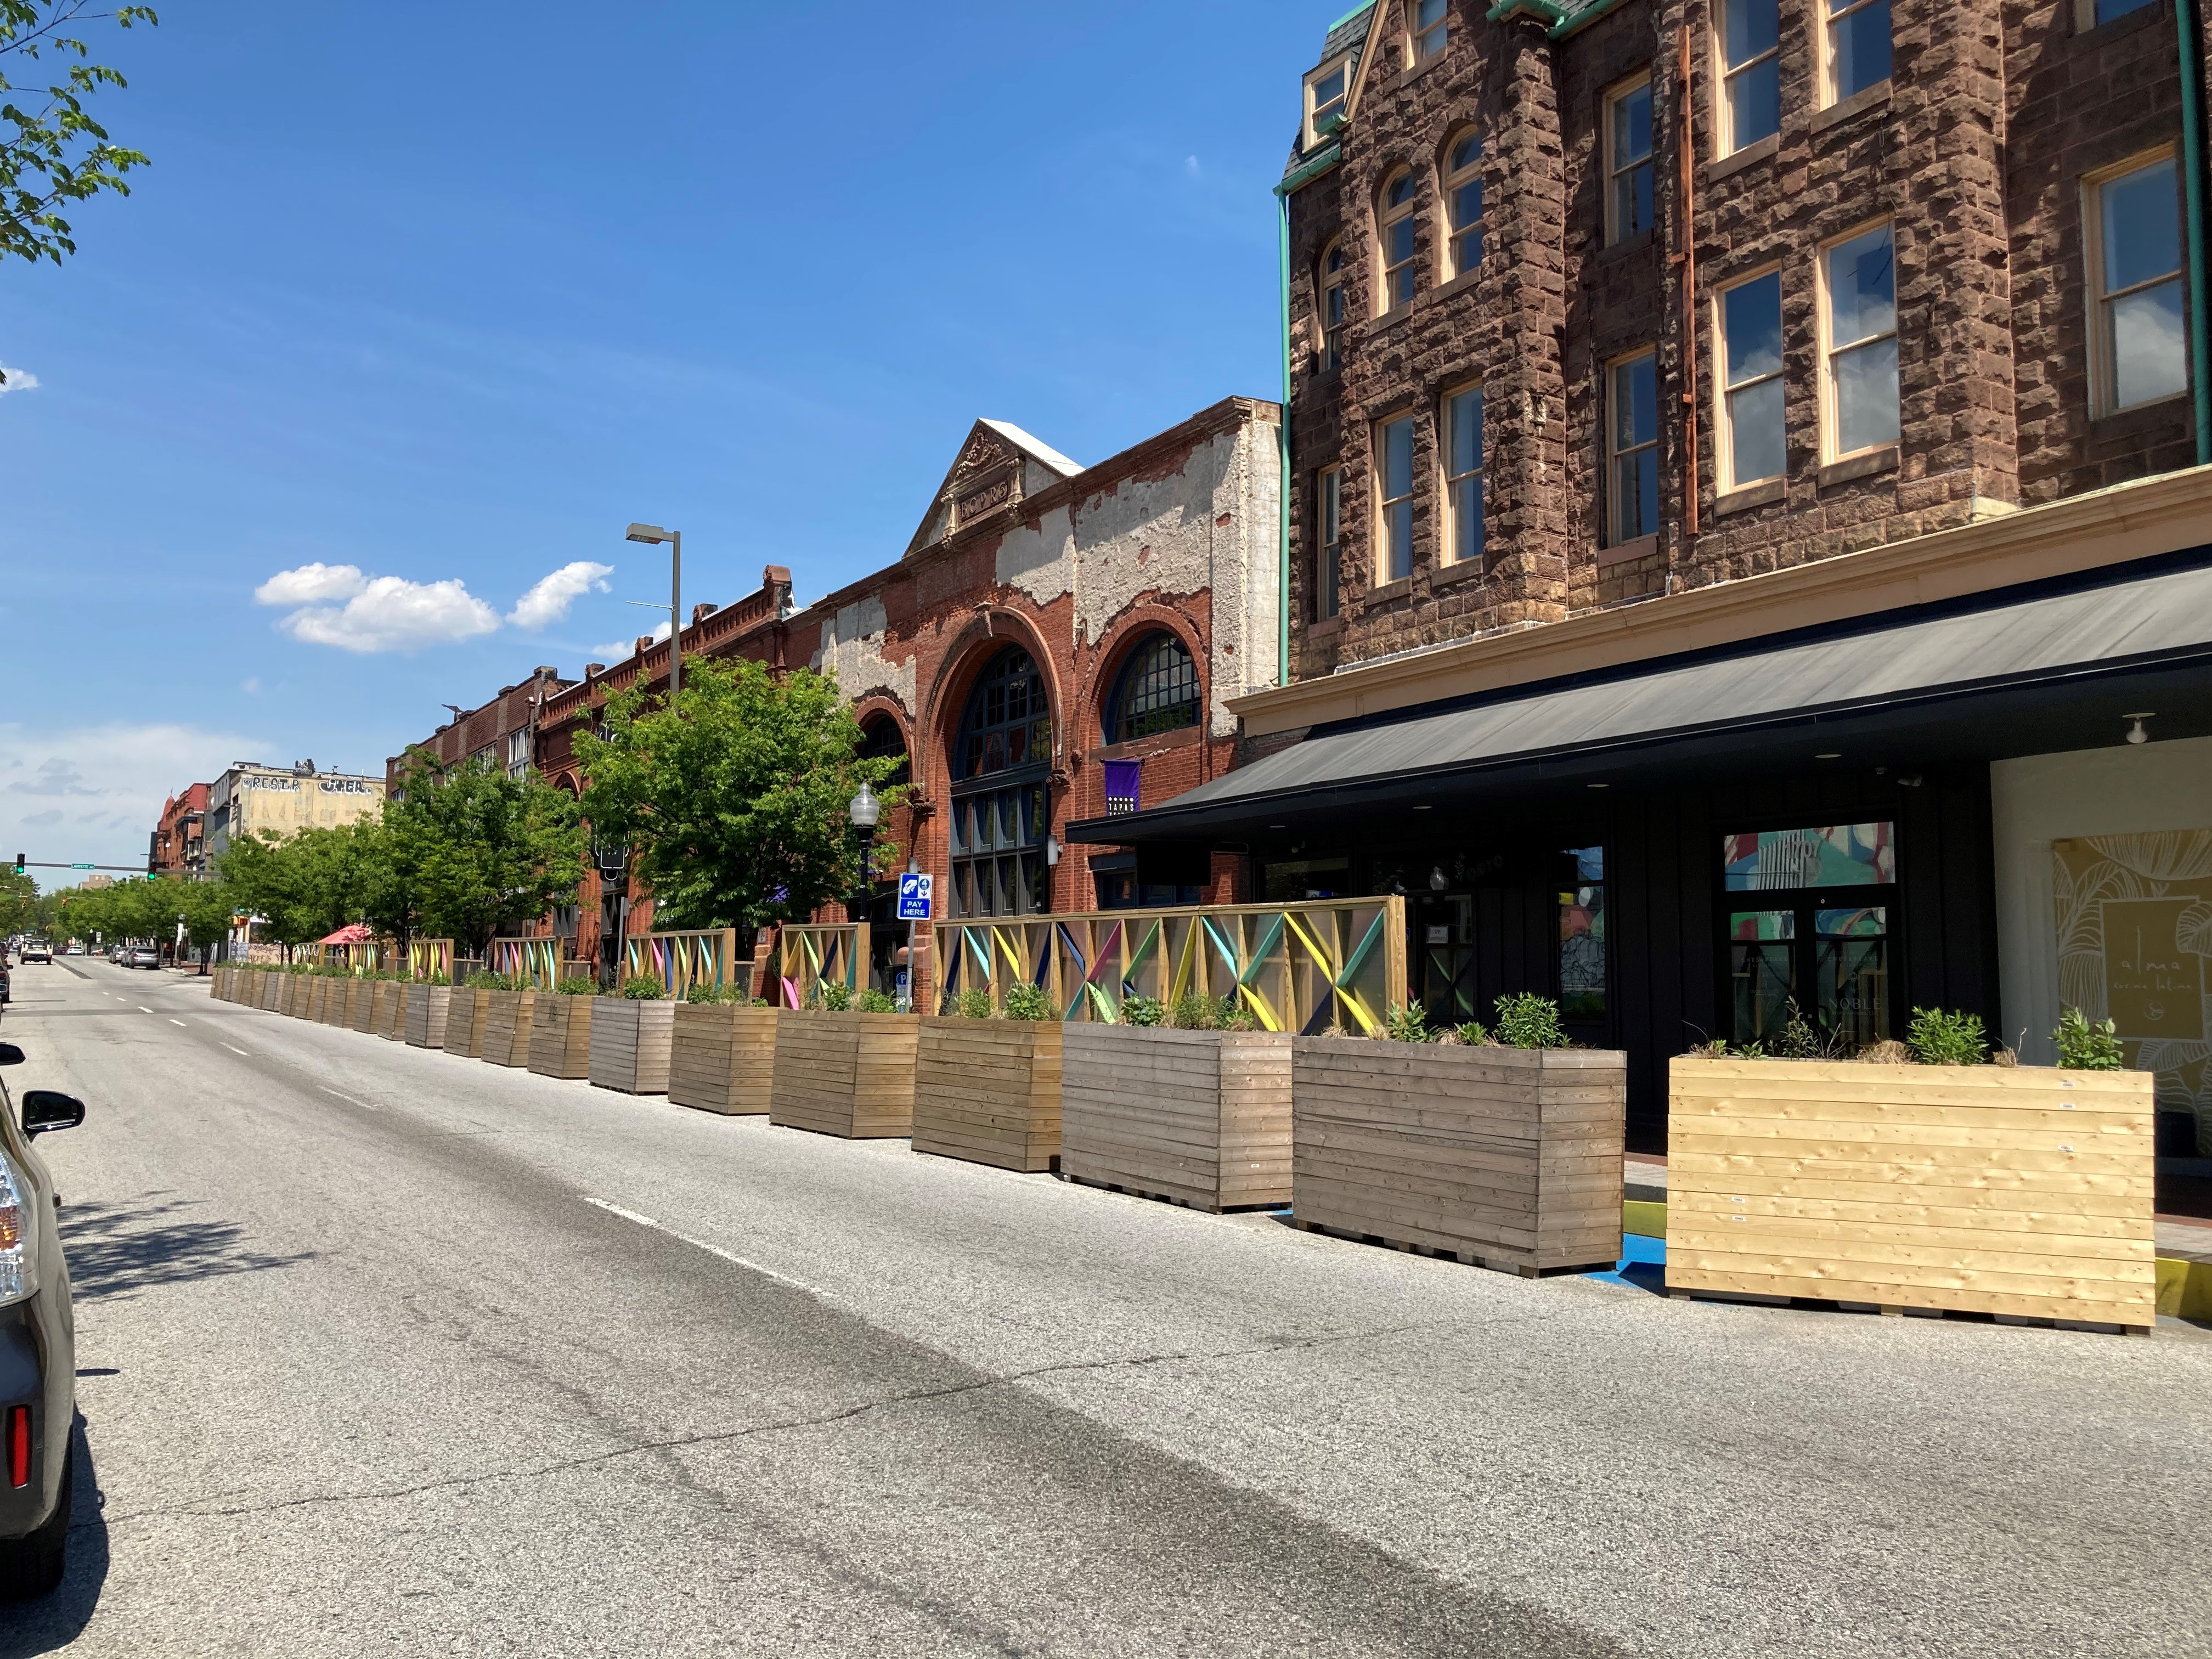 Planters and traffic barriers being used to protect parklet spaces within the roadway along a city block.